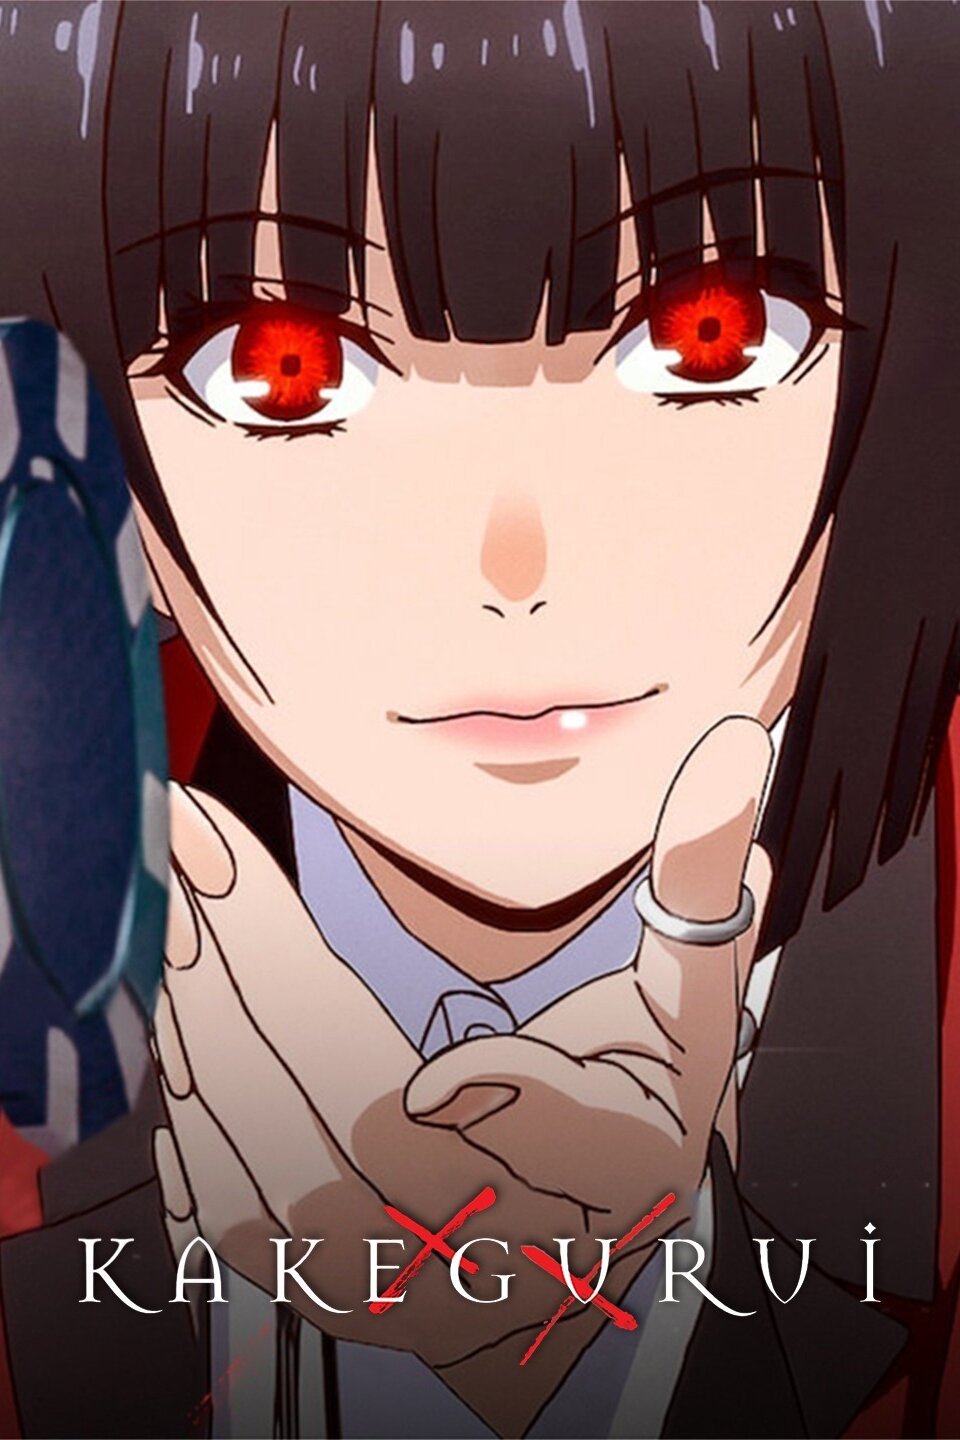 Larawan_Diary - Anime Title: Kakegurui (2017) Genre: Gambling Review: This  anime is a mixed of great storyline and weird characters. It is about the  elite school specialized for gambling, the school teaches